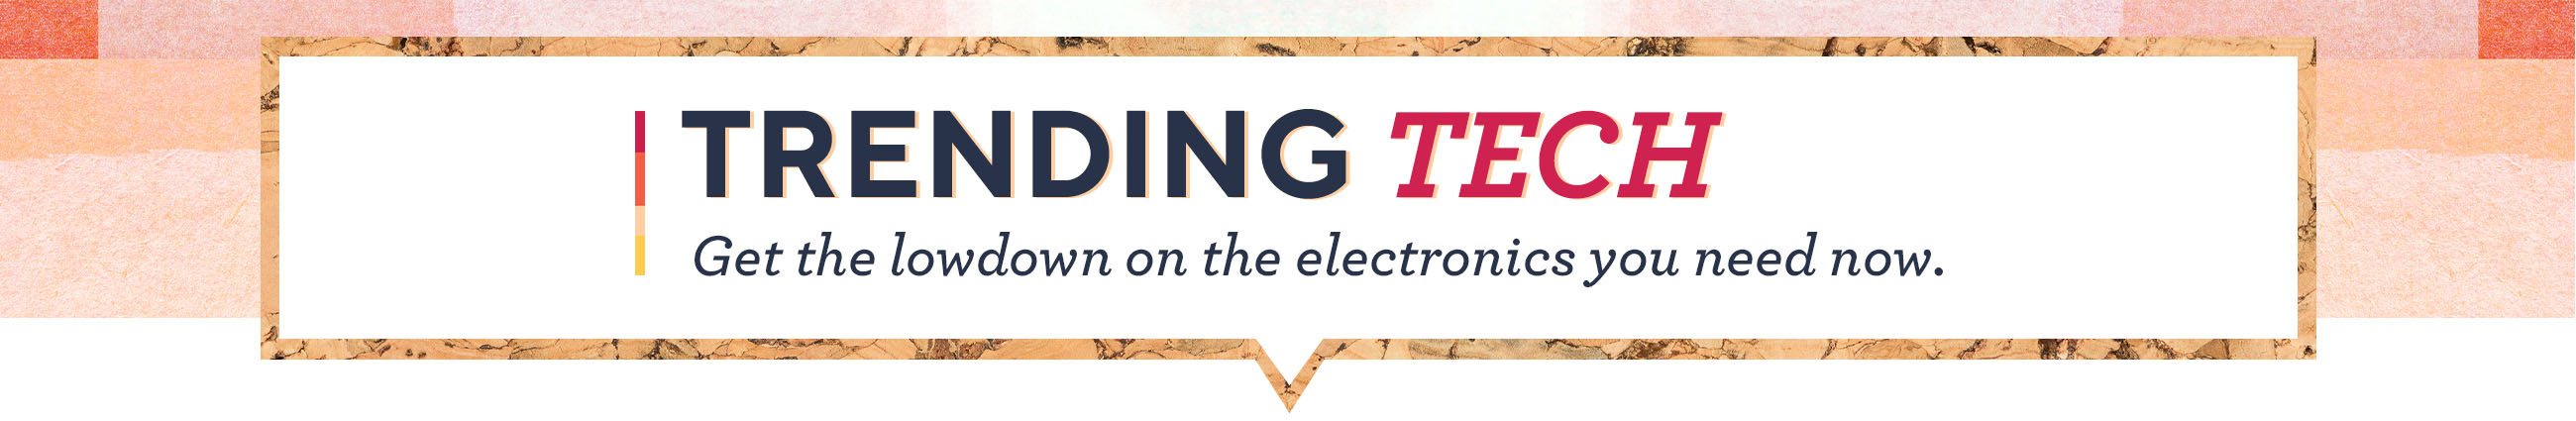 Trending Tech: Get the lowdown on the electronics you need now. 